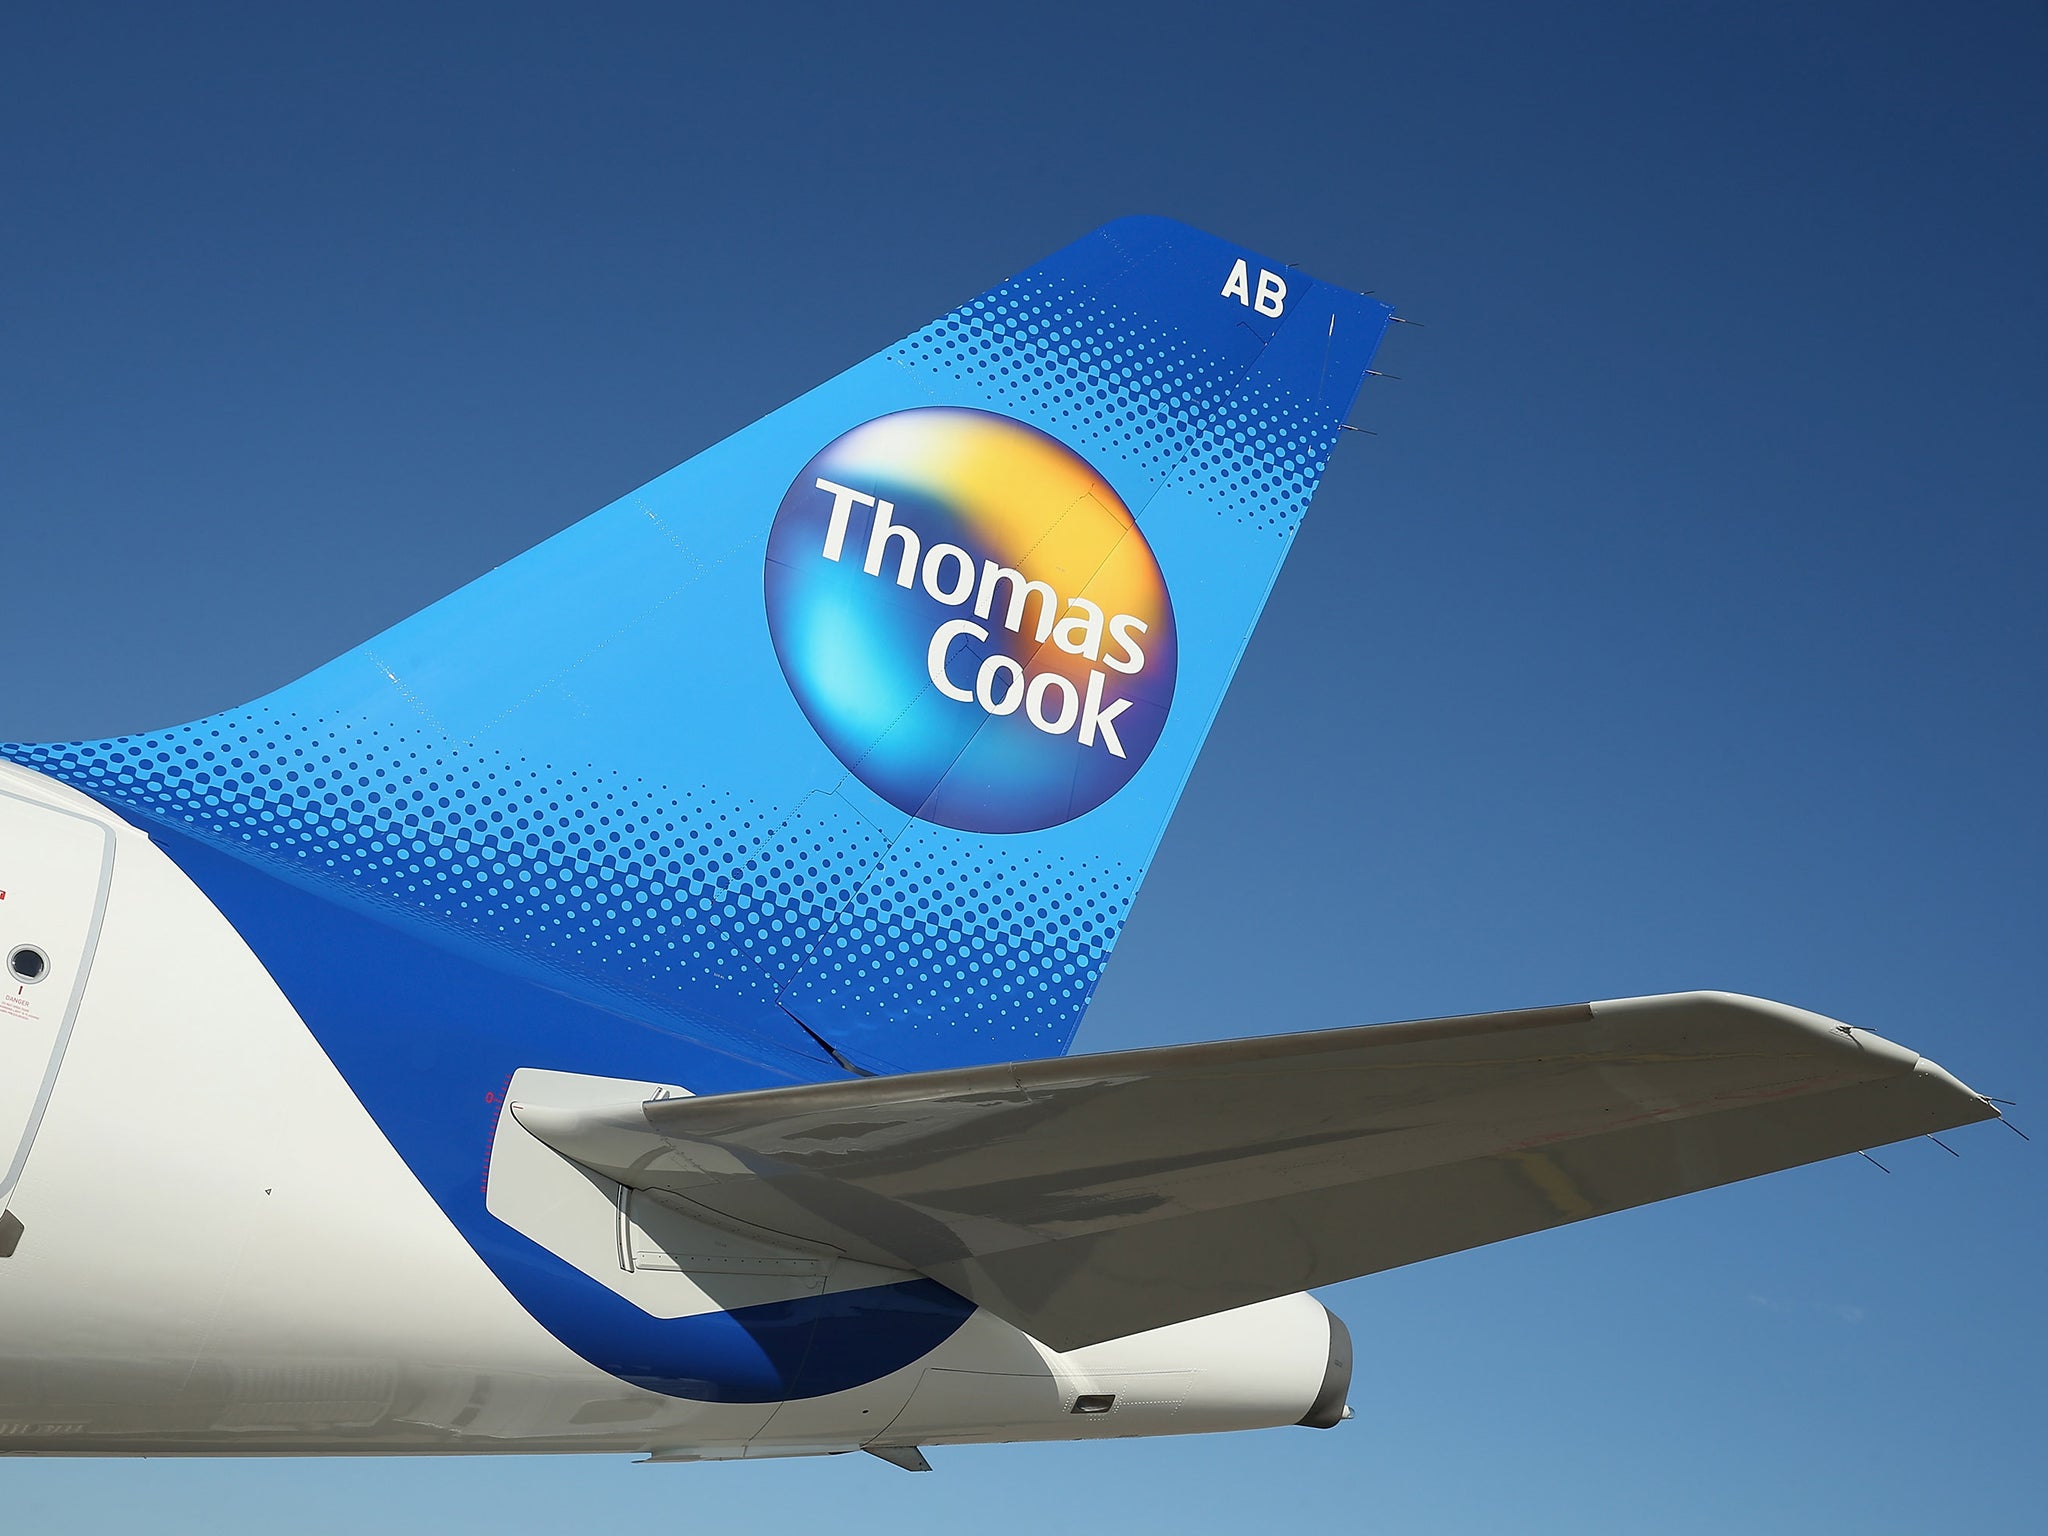 Thomas Cook has accepted the findings from the review, and will use them as a “catalyst to further accelerate the change programme which is already well under way”